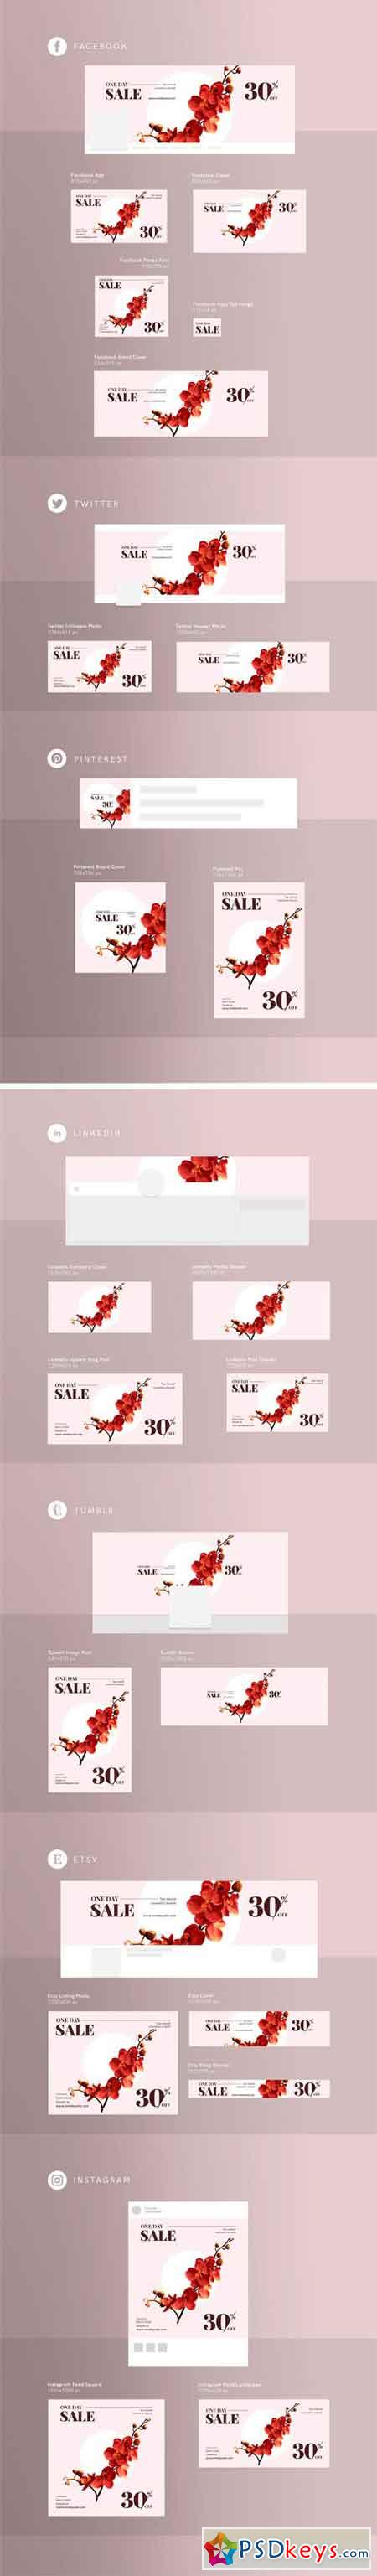 Branding Pack One Day Sale 1556050